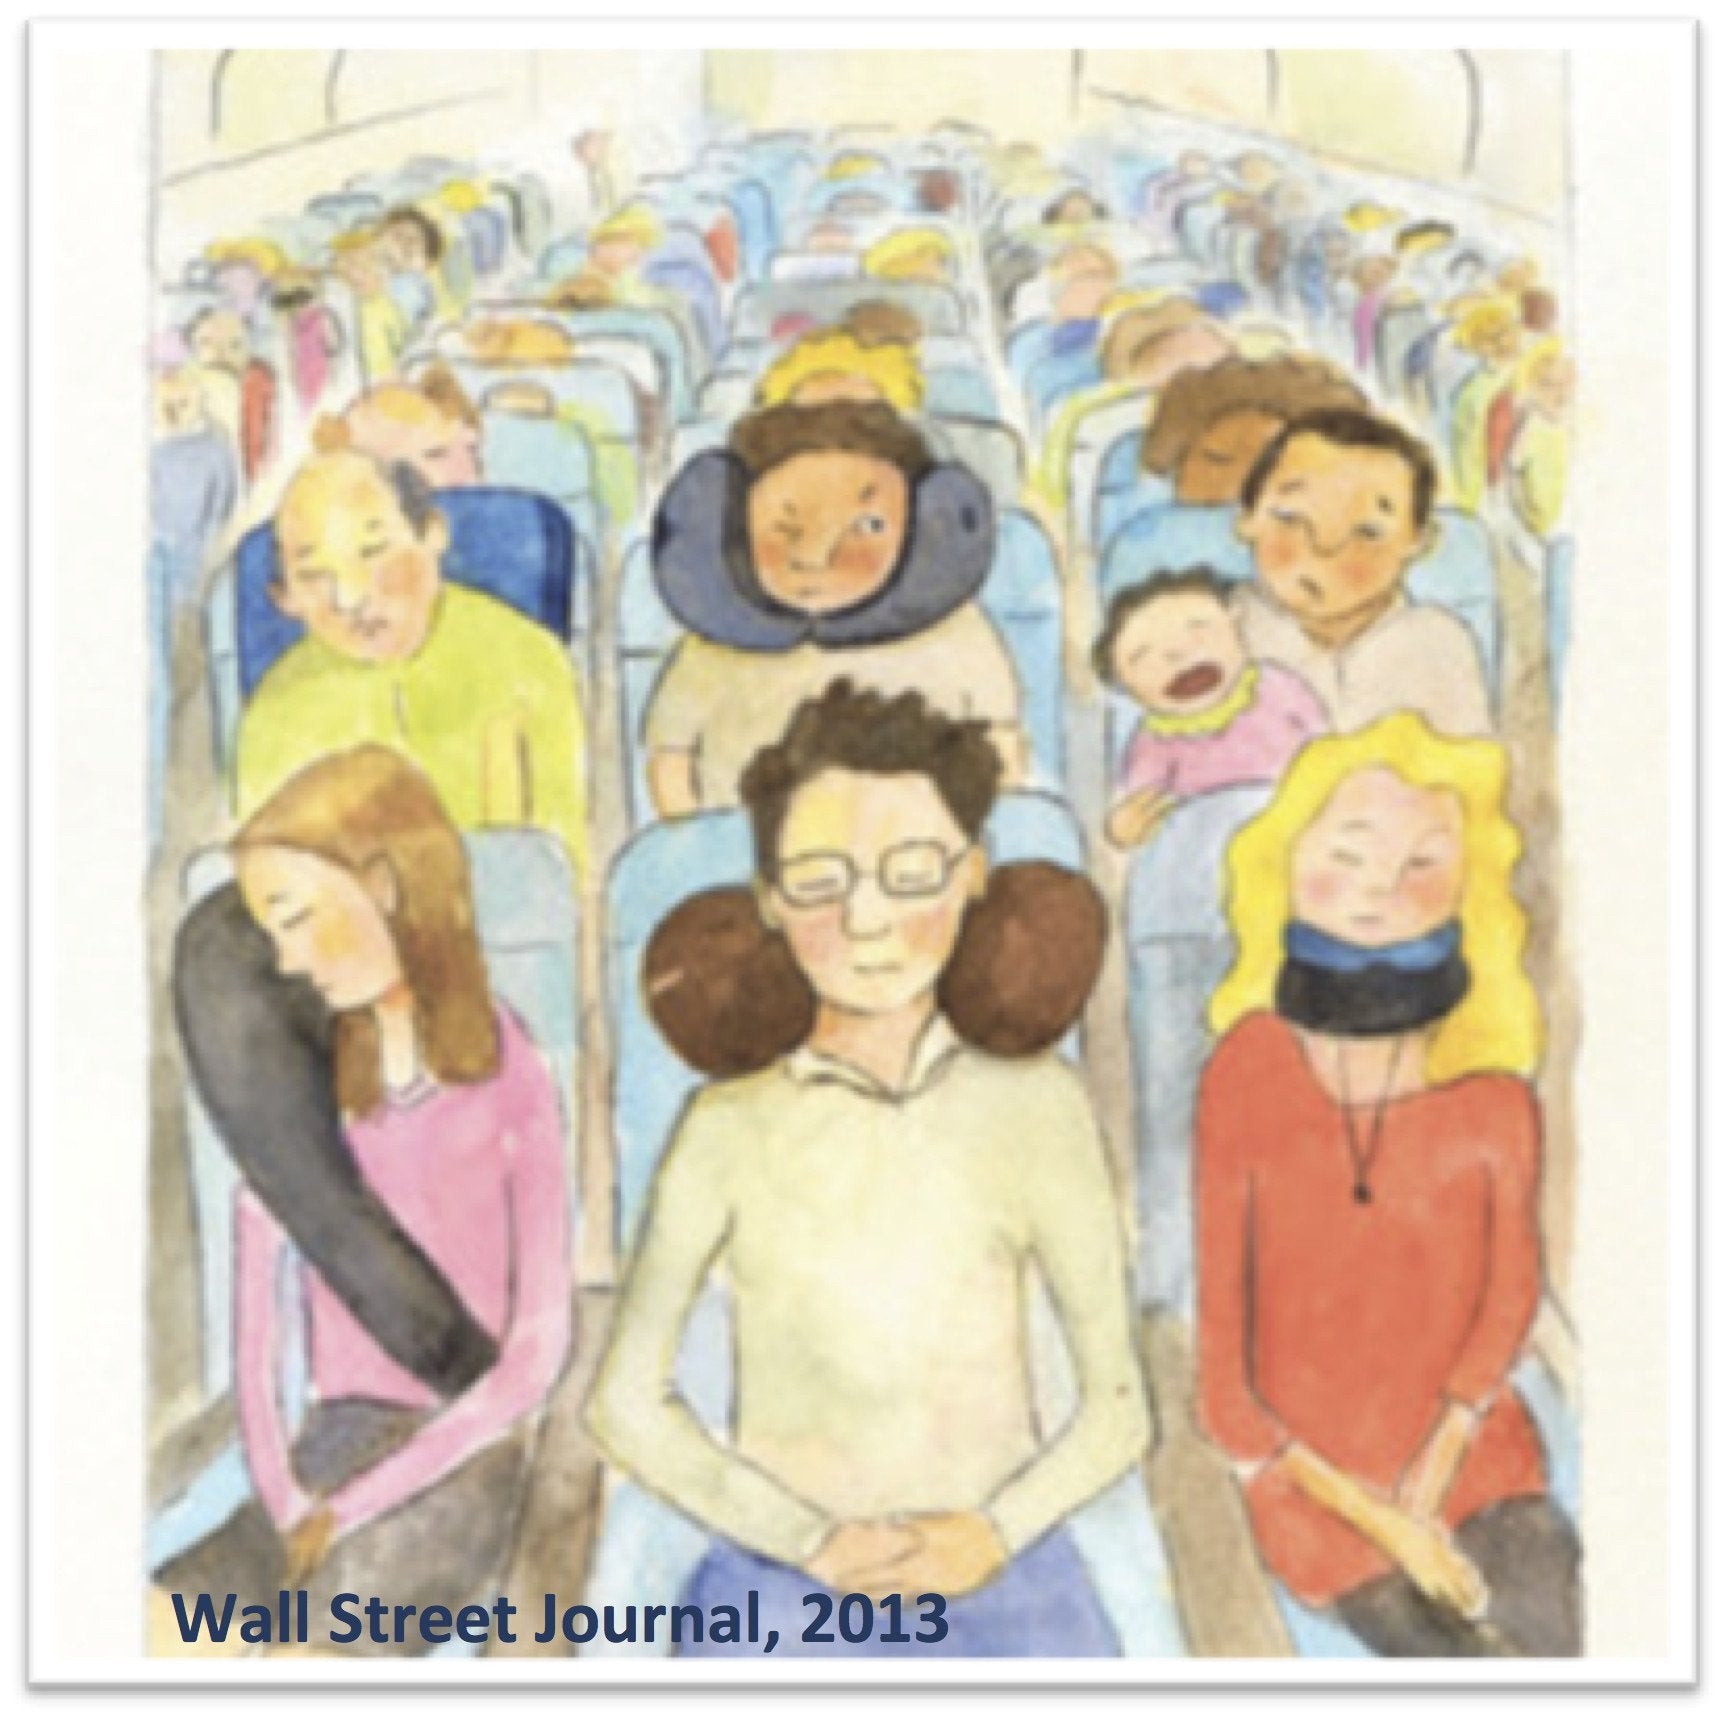 An illustration of passengers on an airplane using a variety of travel pillows